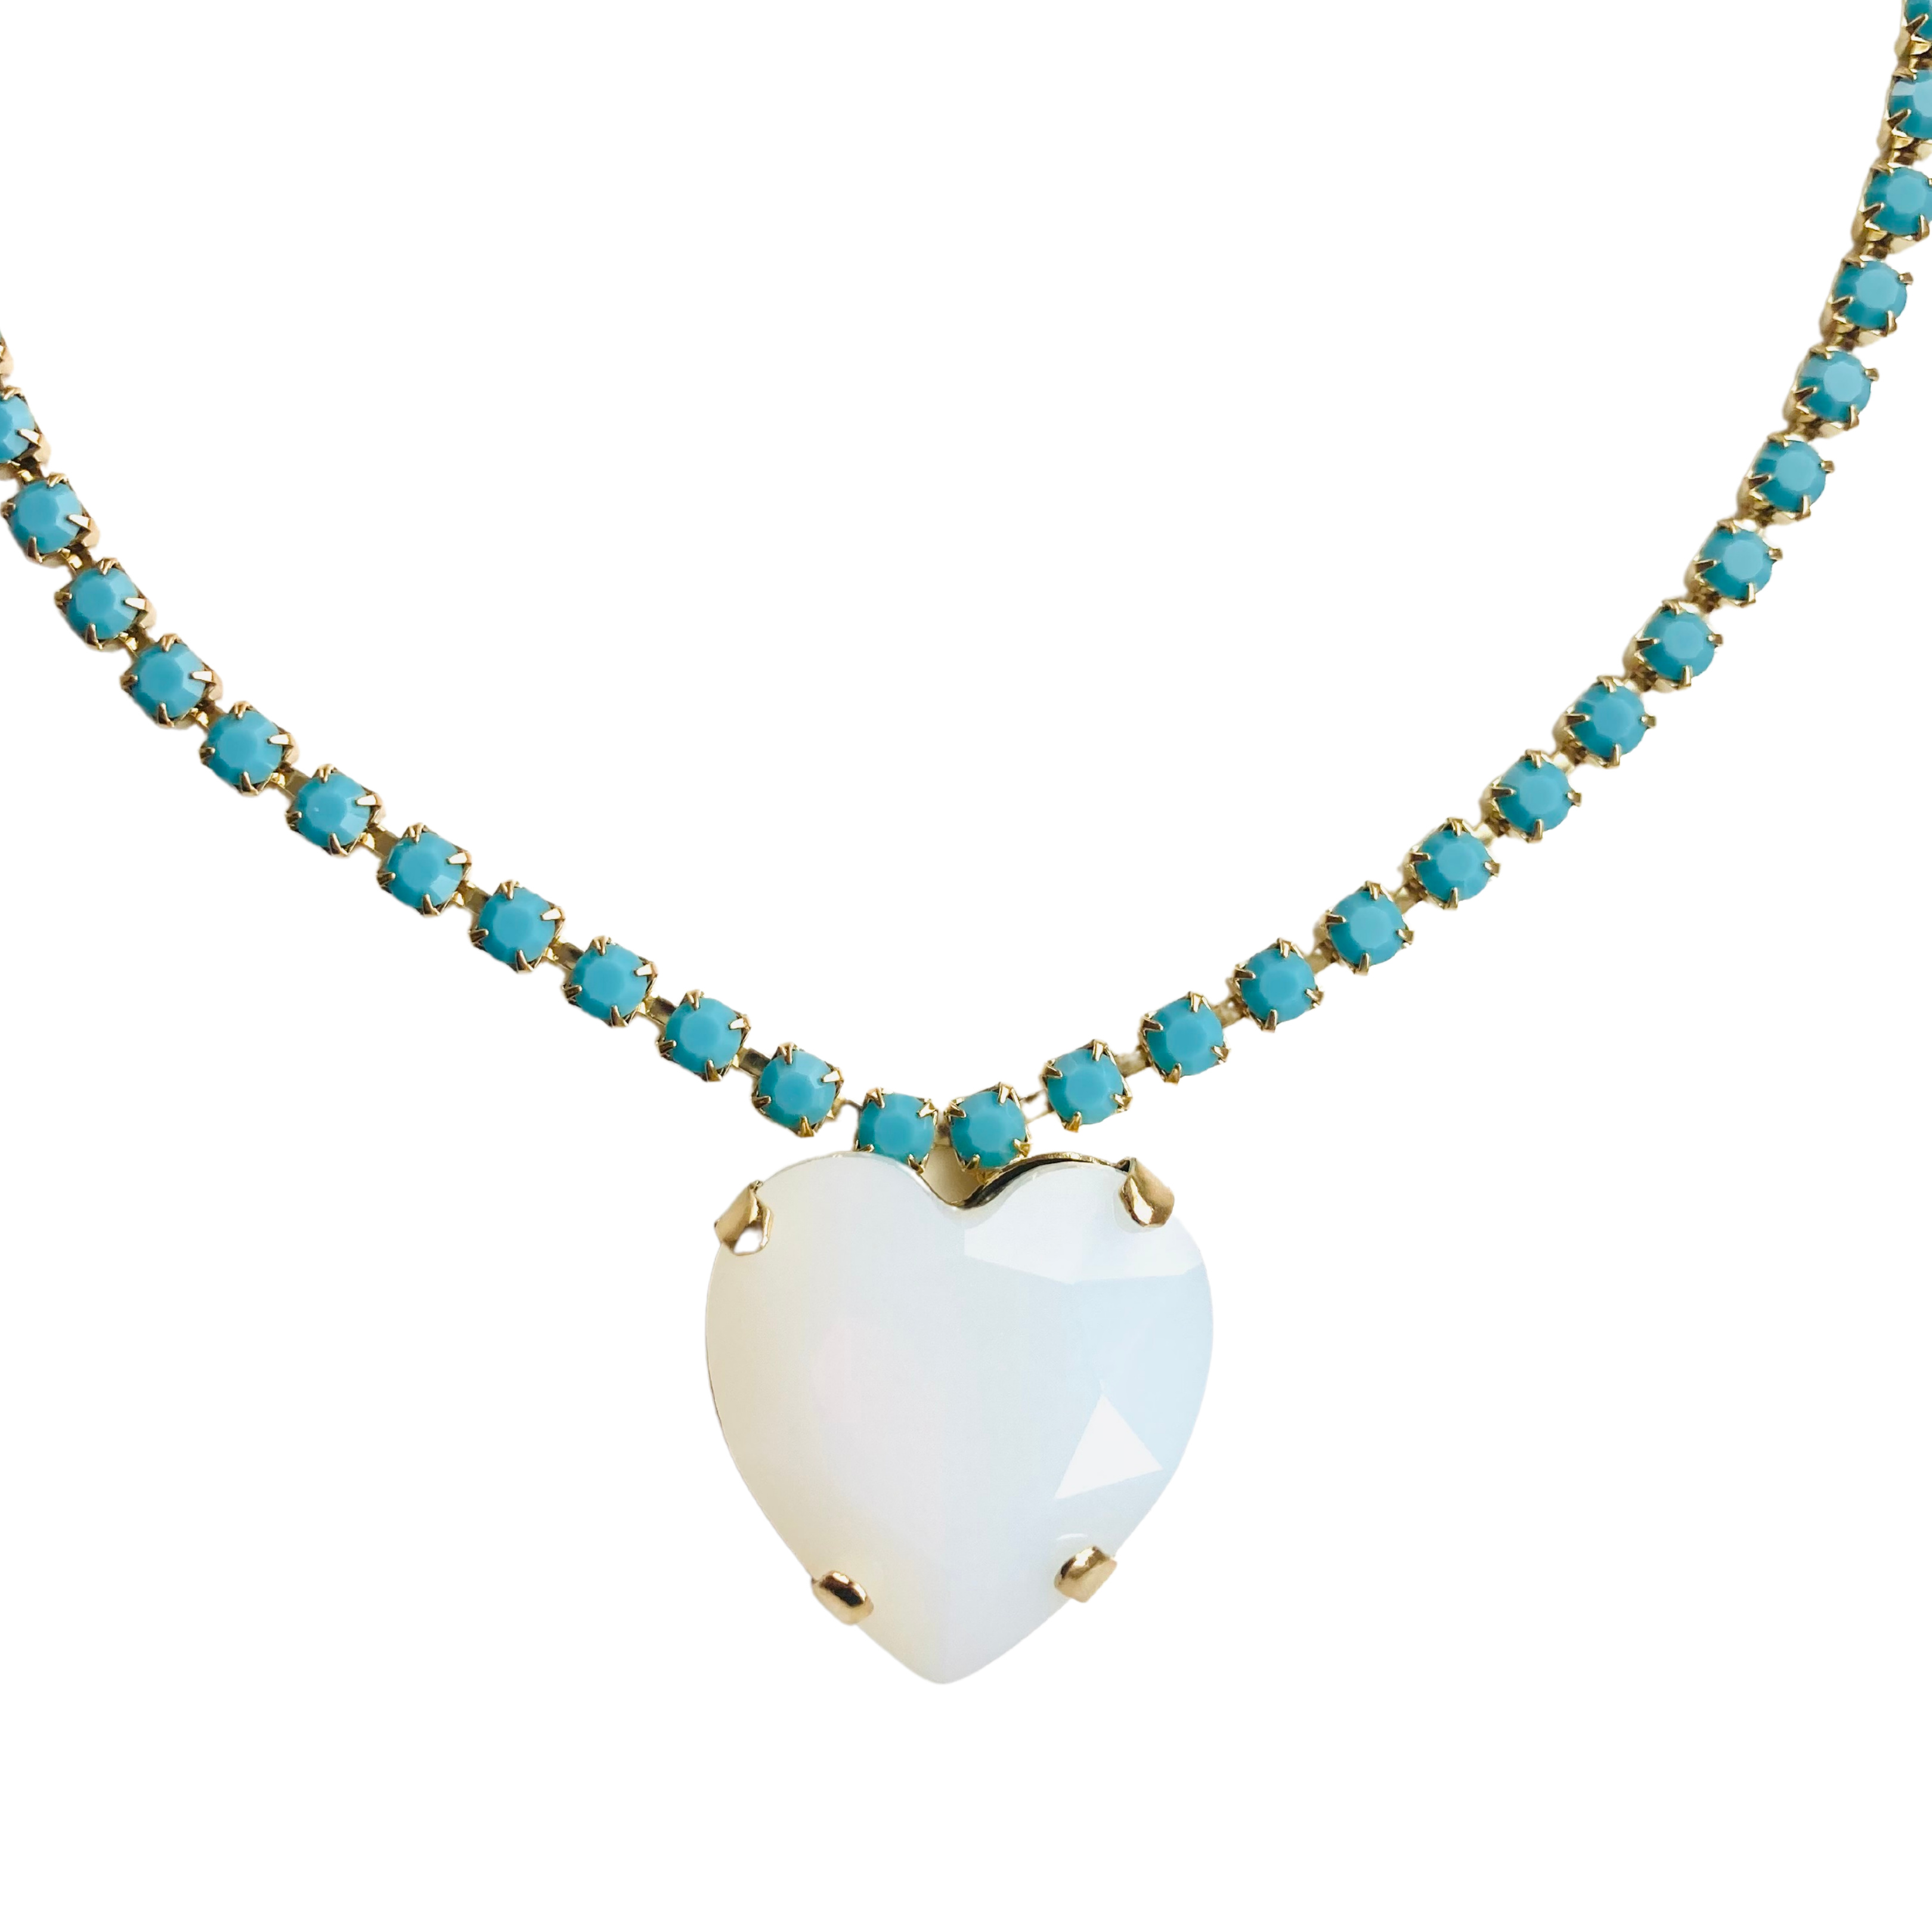 The Pink Reef Women's Heart Of The Ocean Necklace White Opal In Blue